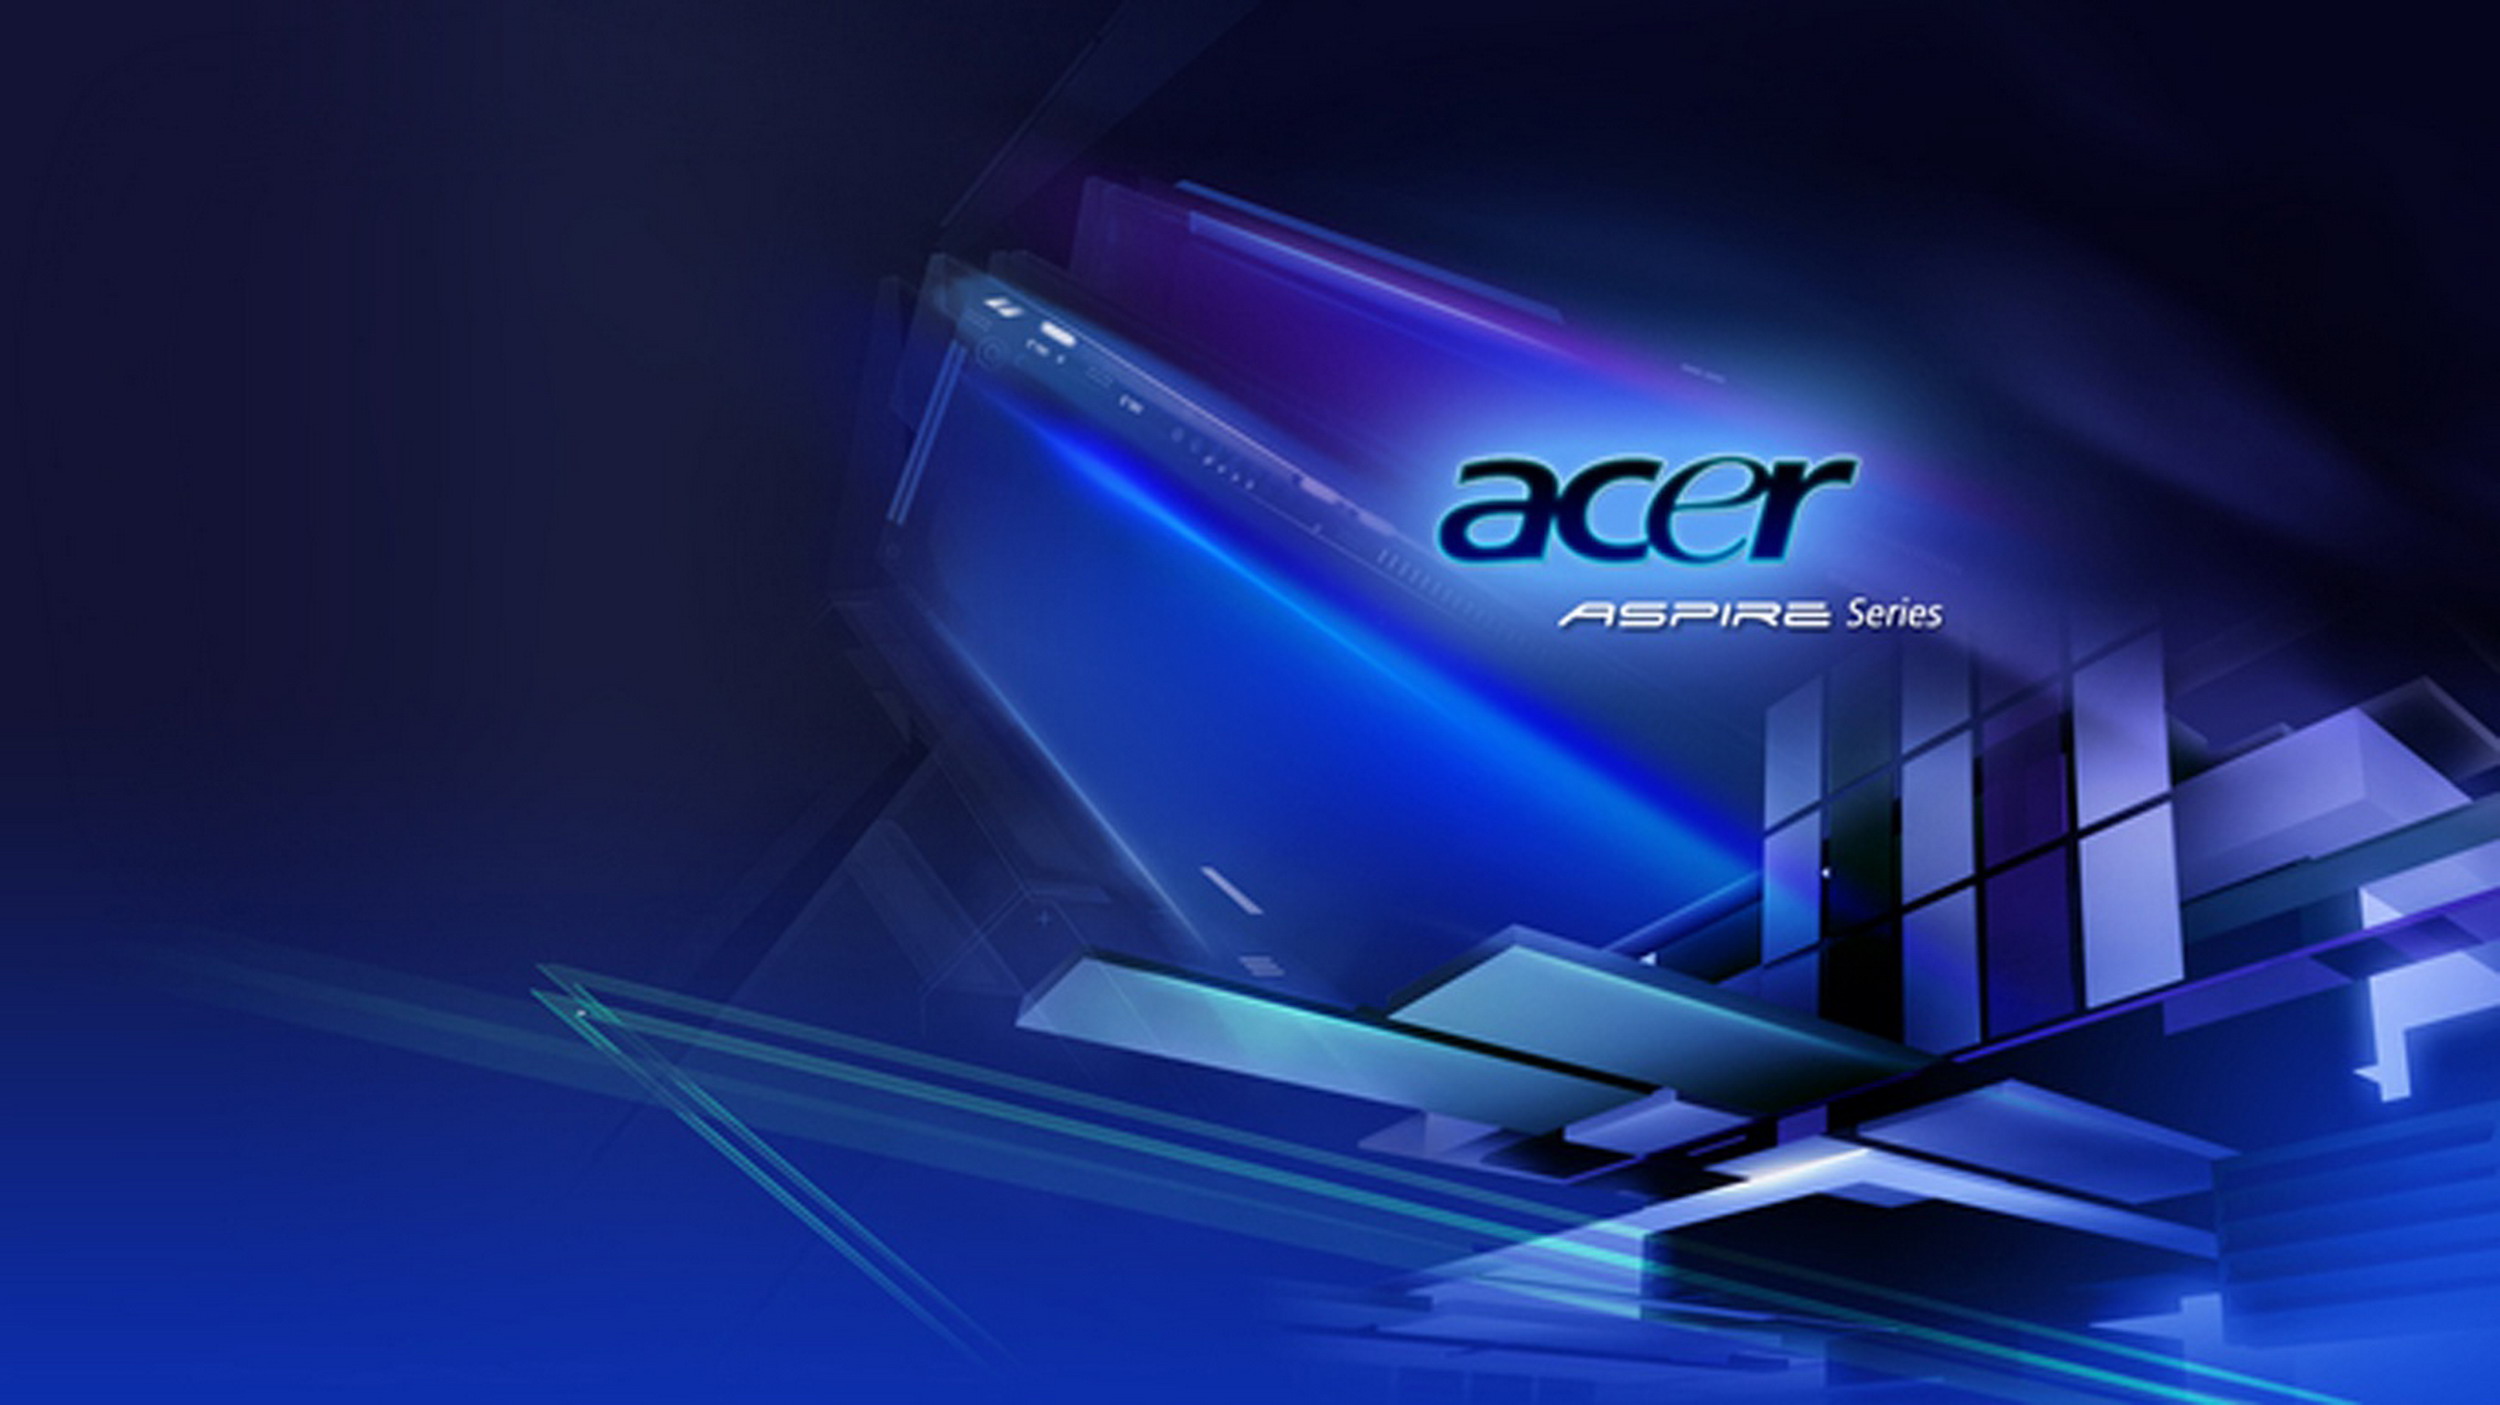 Download Drivers for Acer’s Aspire E5-575 Notebook Models